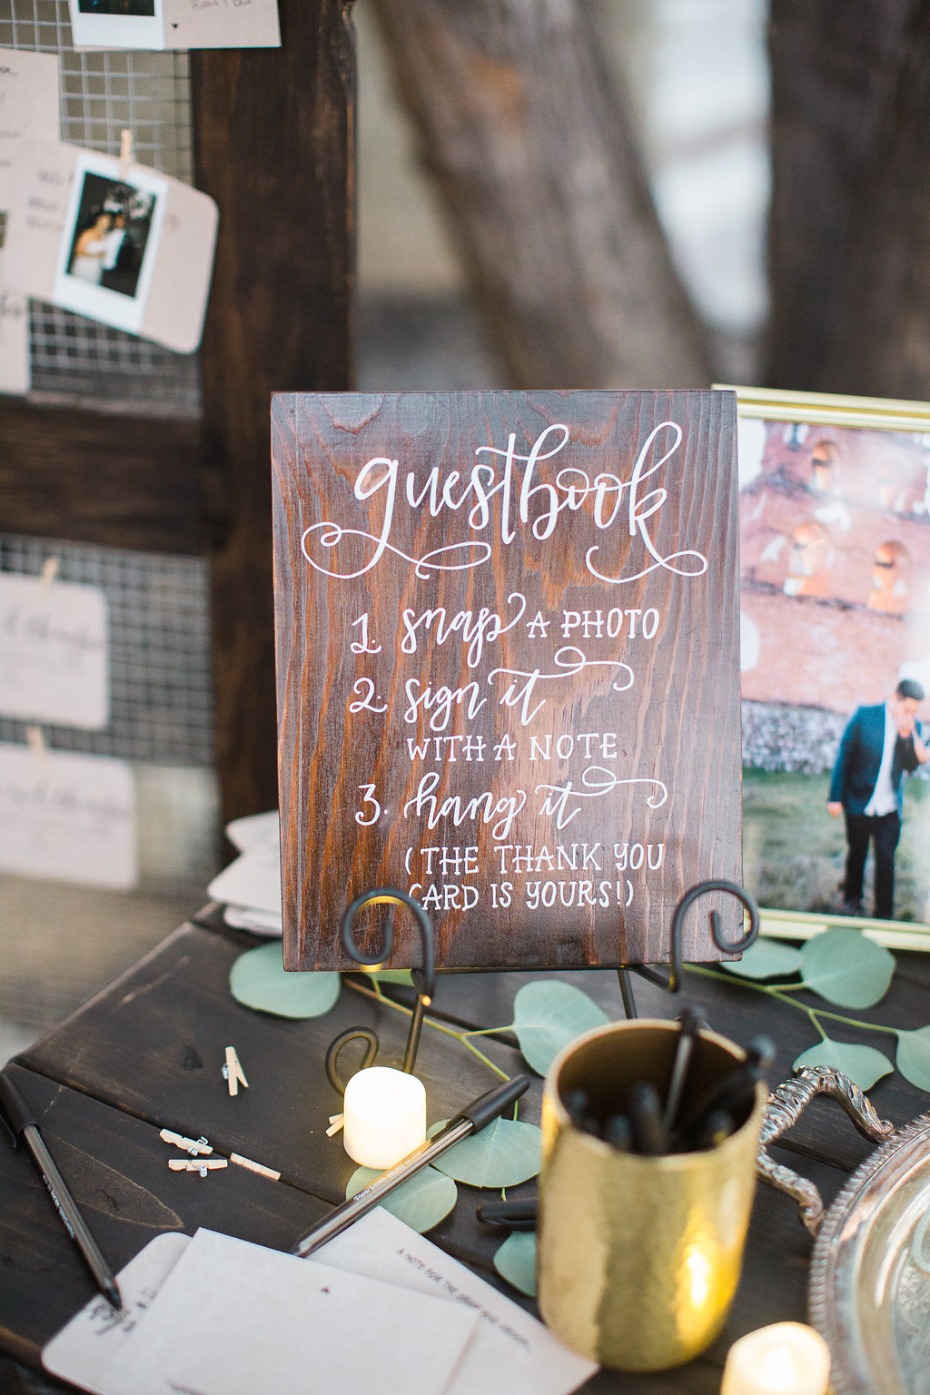 Have a polaroid guest book